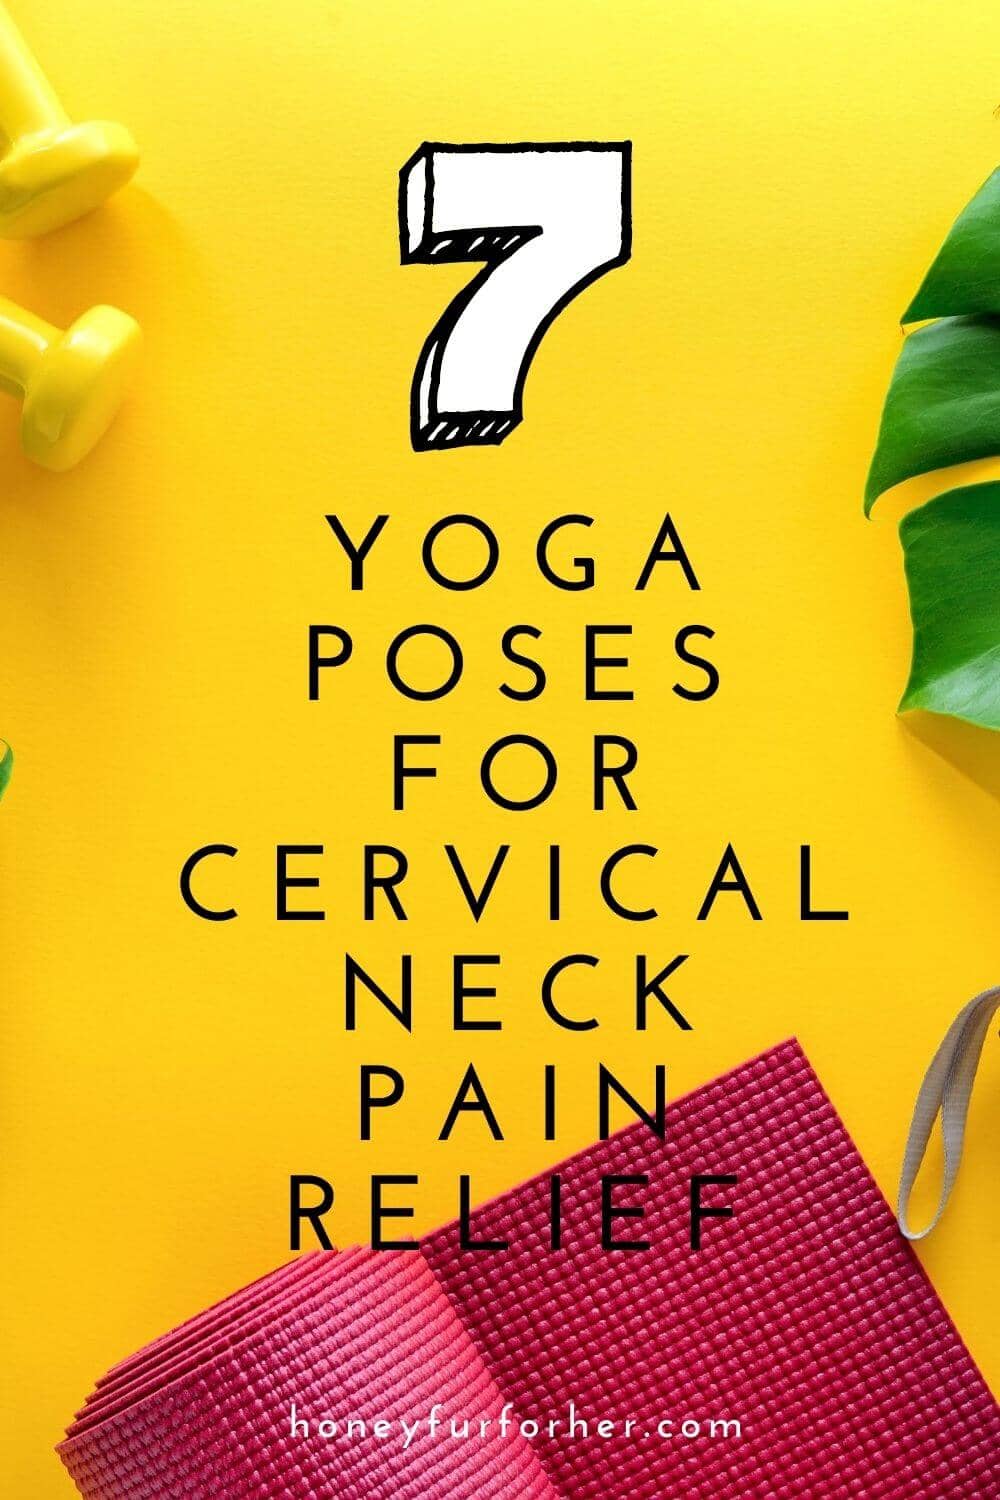 Top 7 Yoga Poses For Neck Pain Relief, Asanas For Cervical Spine, Neck And Shoulder Pain, Back & Neck Strengthening Poses #ayurveda #yogaforneckpain #neckpain #cervical